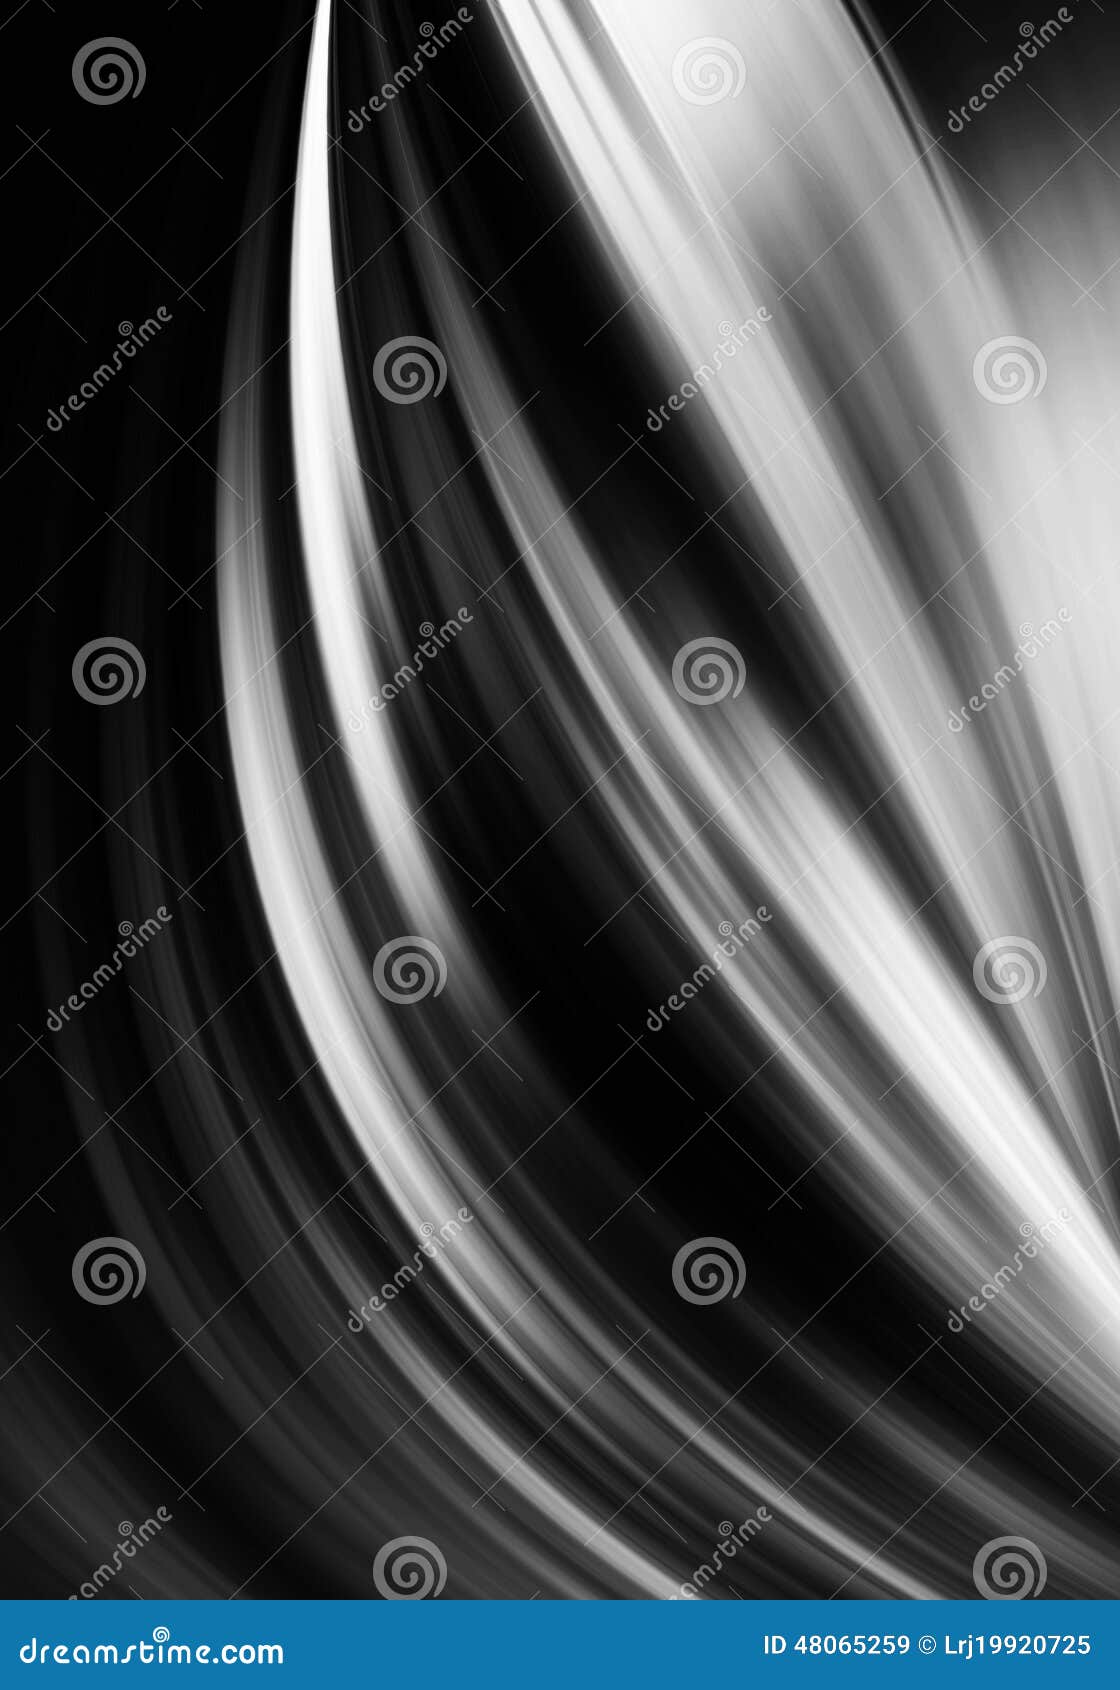 Black and White Abstract Background Stock Illustration - Illustration